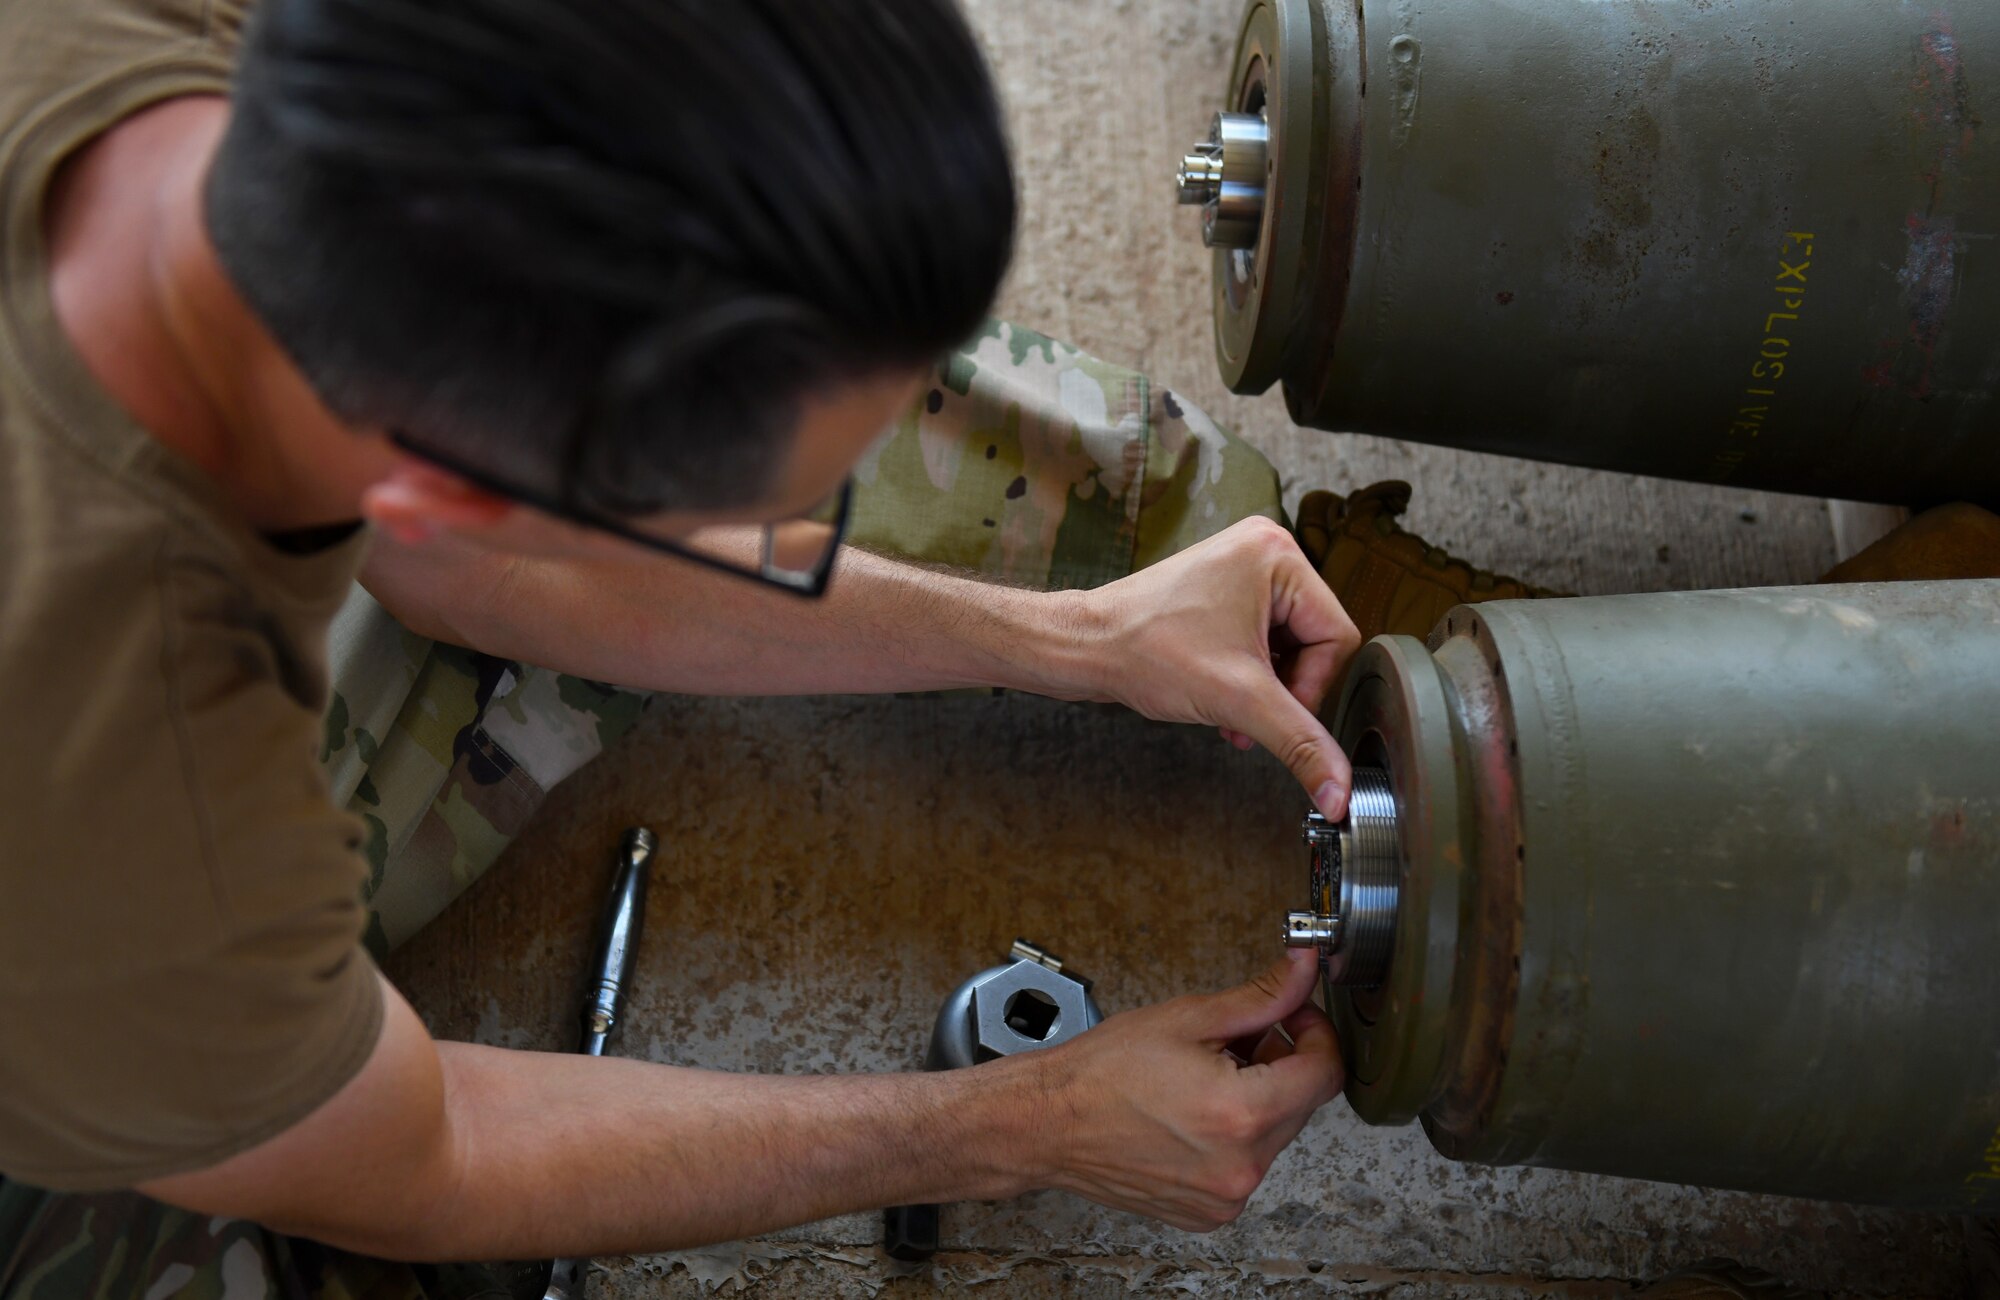 U.S. Air Force Tech. Sgt. Brandon Coleman, 726th Expeditionary Air Base Squadron munitions production supervisor, installs a fuse assembly during a bomb build at Chabelley Airfield, Djibouti, Nov. 12, 2019. The 726th EABS Munitions Systems Airmen build, inspect and store all munitions at the airfield, ensuring mission effectiveness at a moment’s notice. (U.S. Air Force photo by Staff Sgt. Alex Fox Echols III)